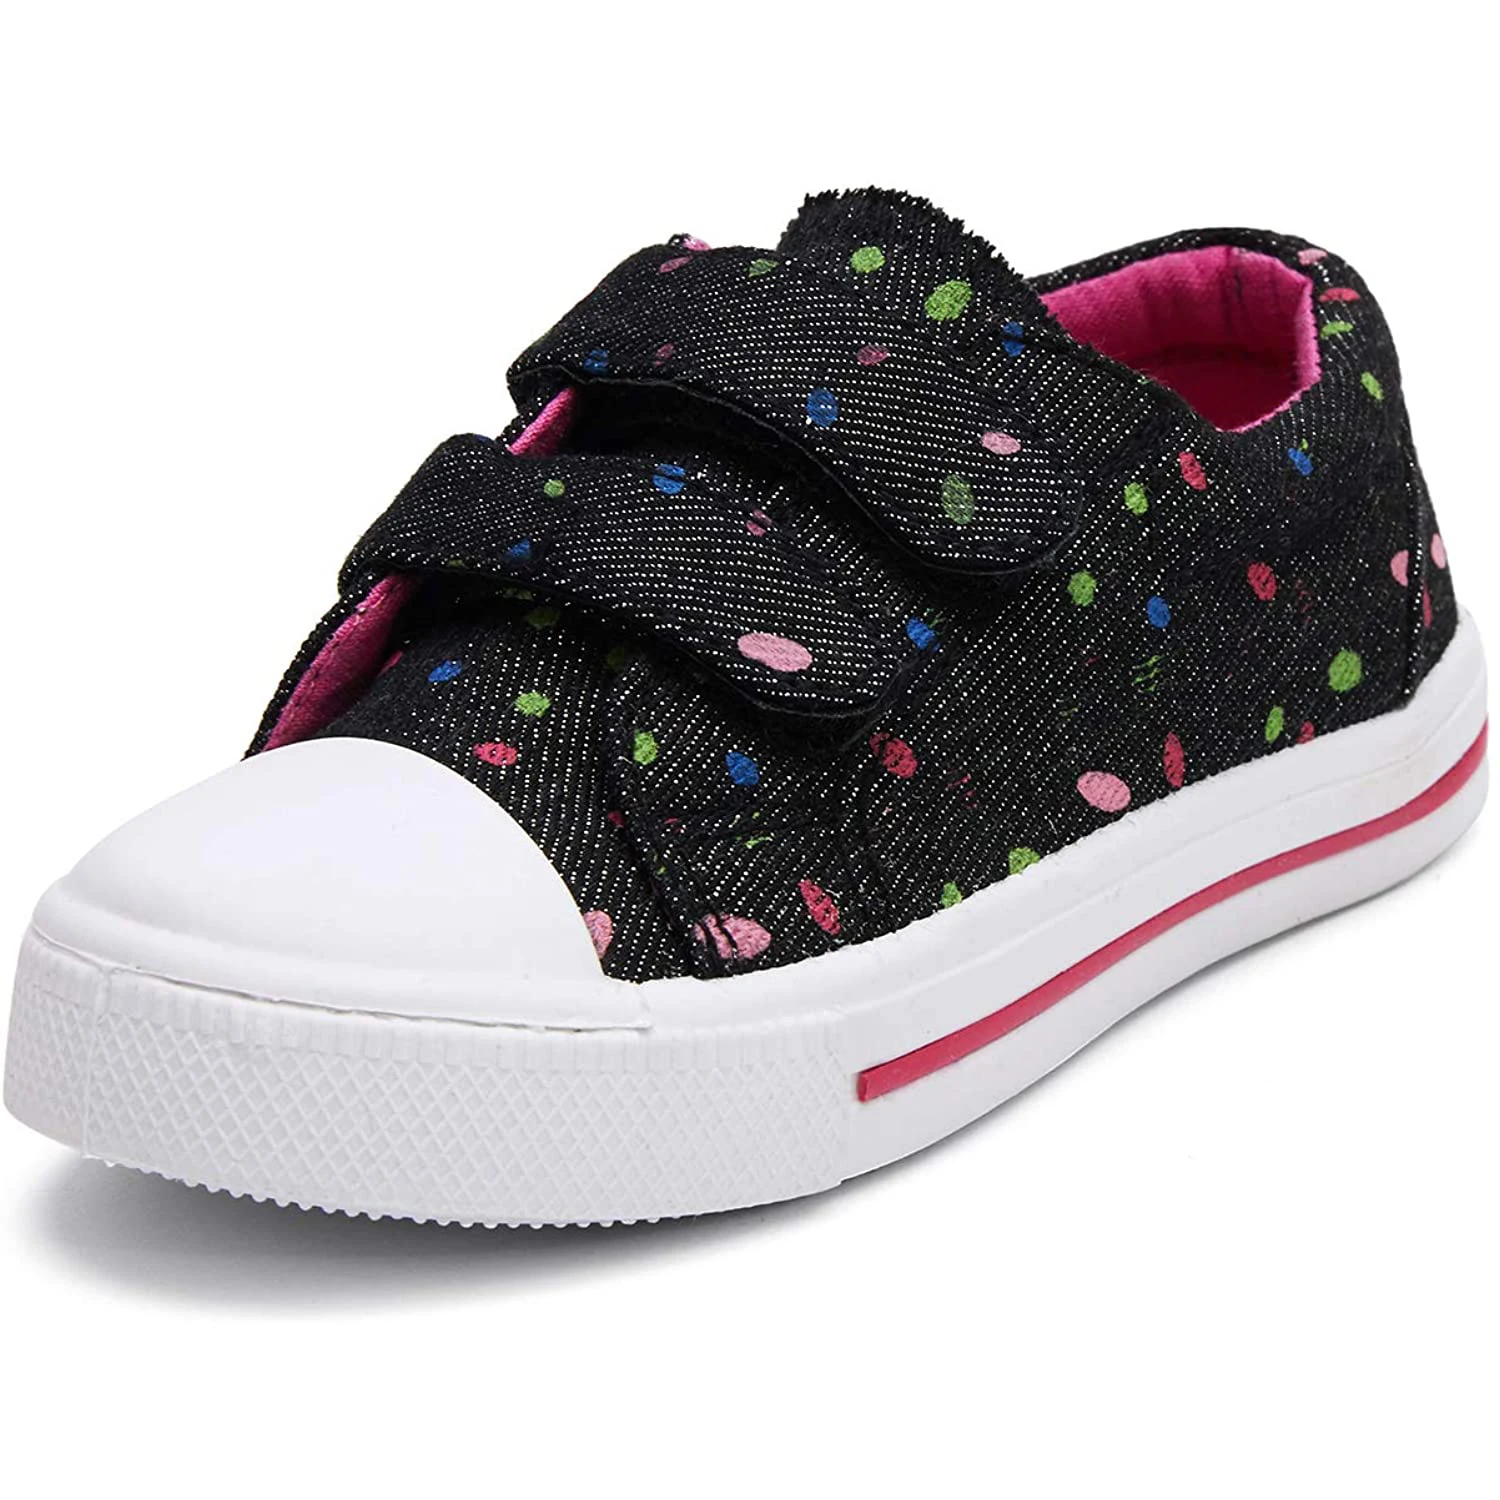 2022 Fashion High Quality Sneakers for Boys and Girls Toddler Kids Soft Walking Shoes